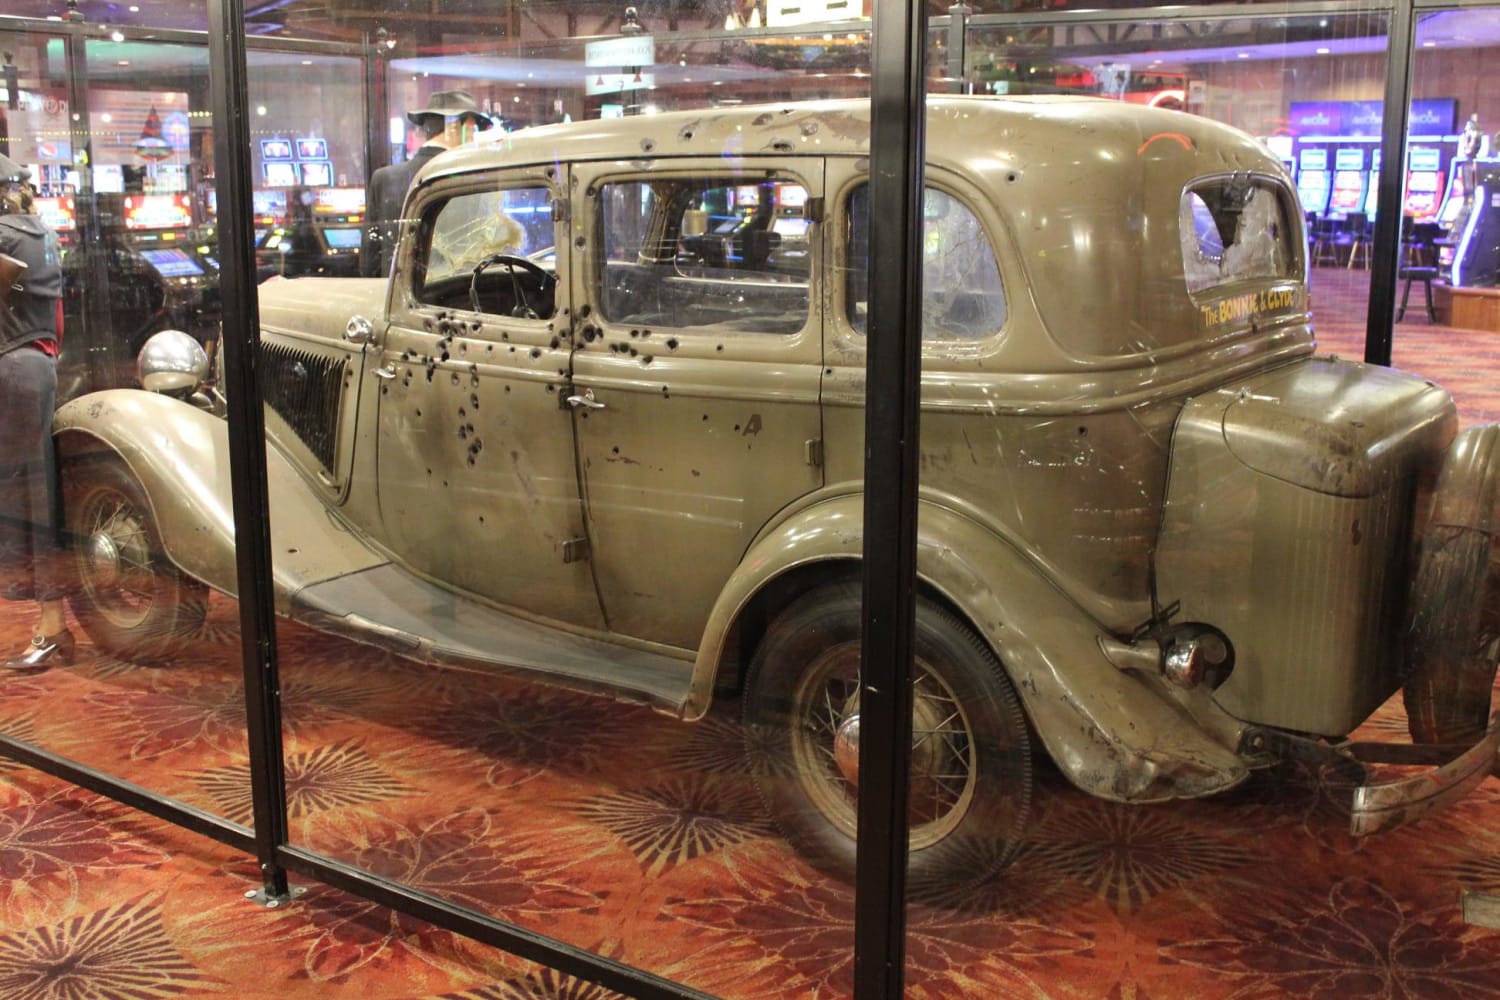 1934 Ford V-8 Sedan, last used by Bonnie and Clyde in Arcadia, Louisiana. Now on display at a casino in Primm, Nevada.